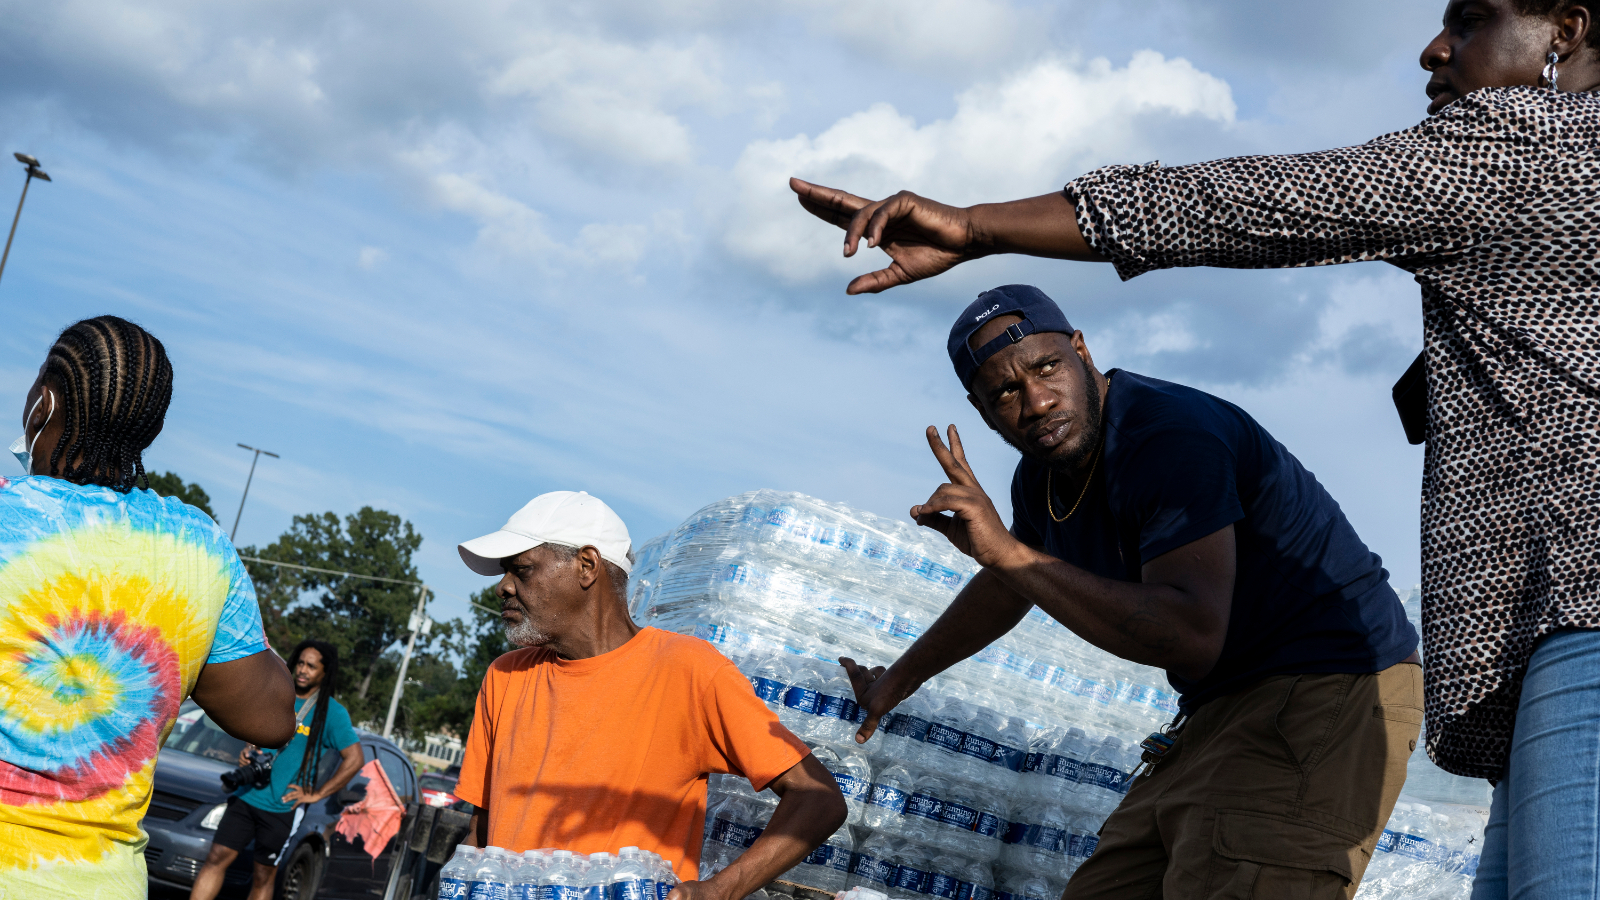 Cases of bottled water are handed out at a Mississippi Rapid Response Coalition distribution site on August 31, 2022 in Jackson, Mississippi.